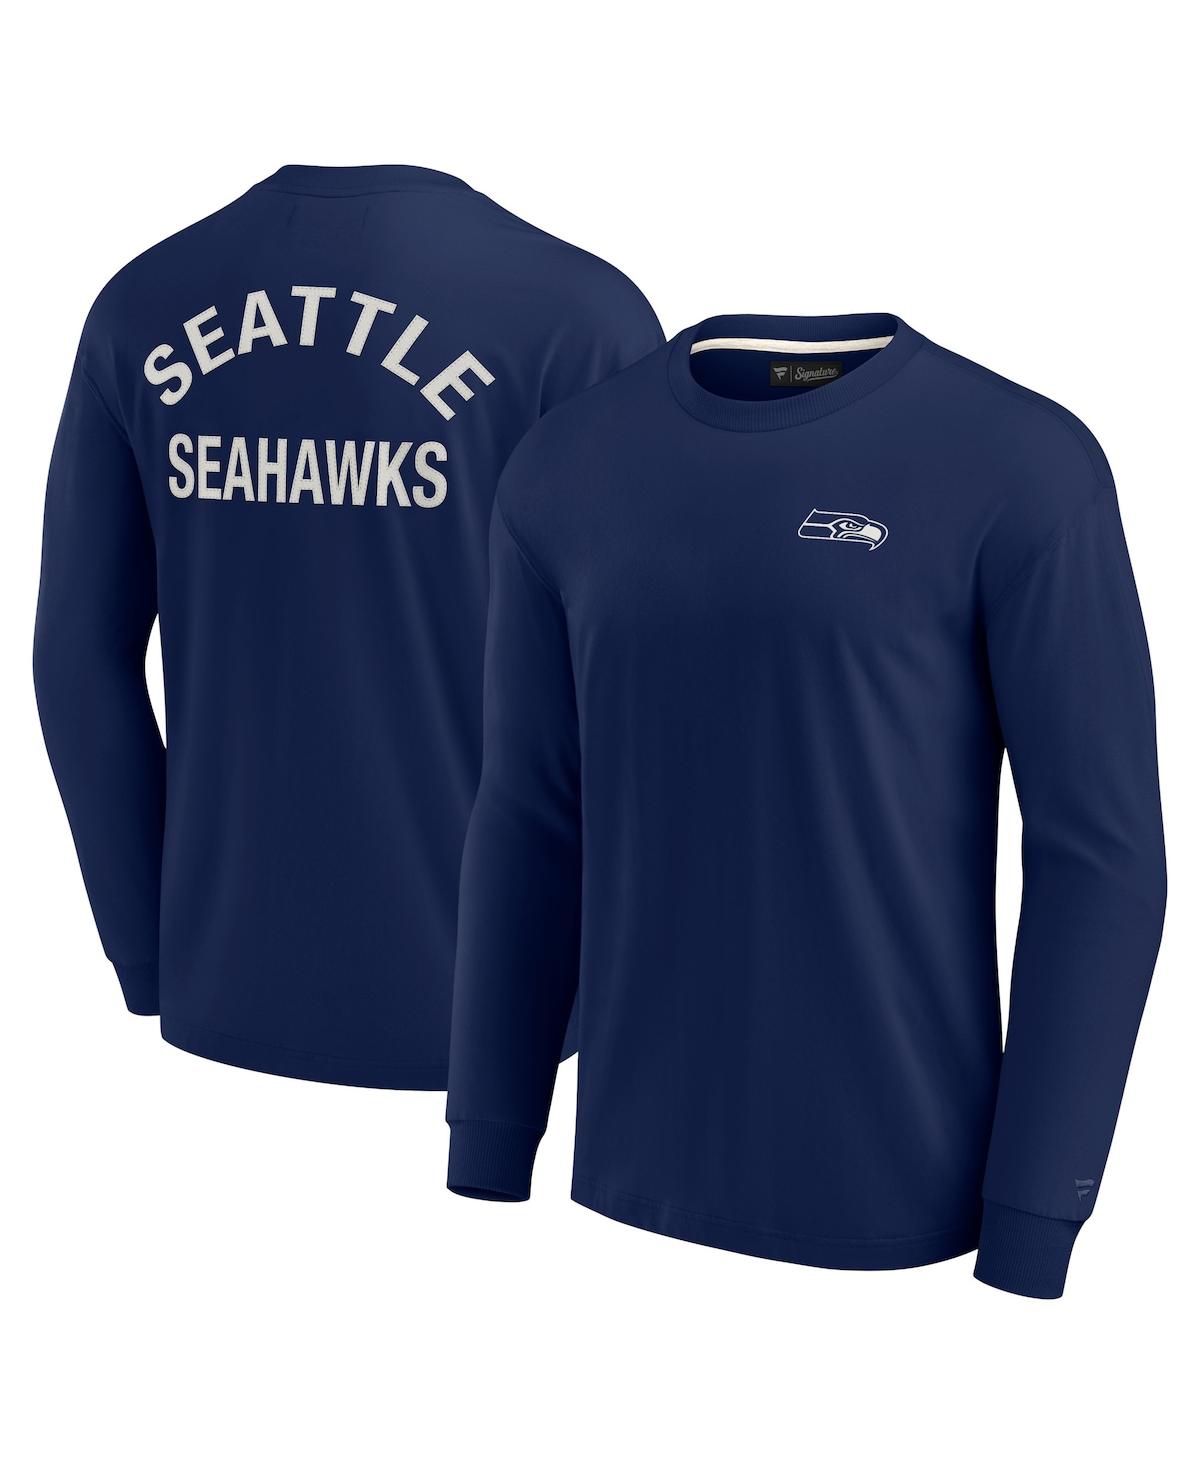 Men's and Women's Fanatics Signature College Navy Seattle Seahawks Super Soft Long Sleeve T-shirt - College Navy